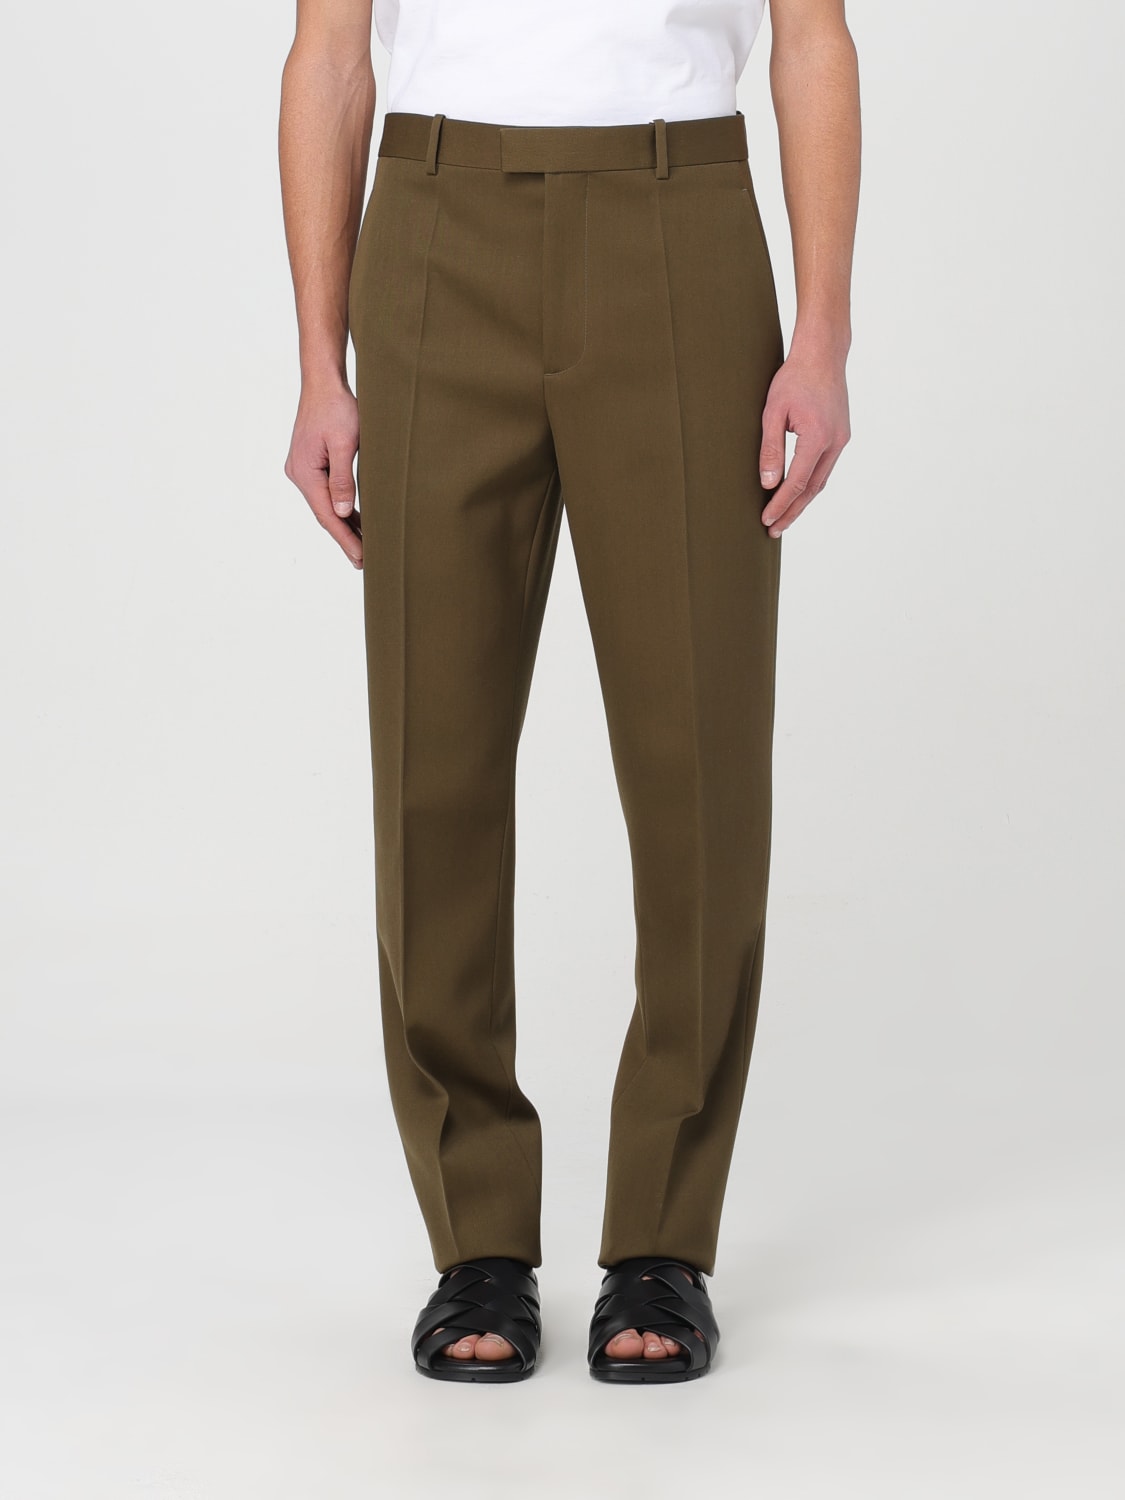 Fendi Trousers Sale, Up to 70% Off